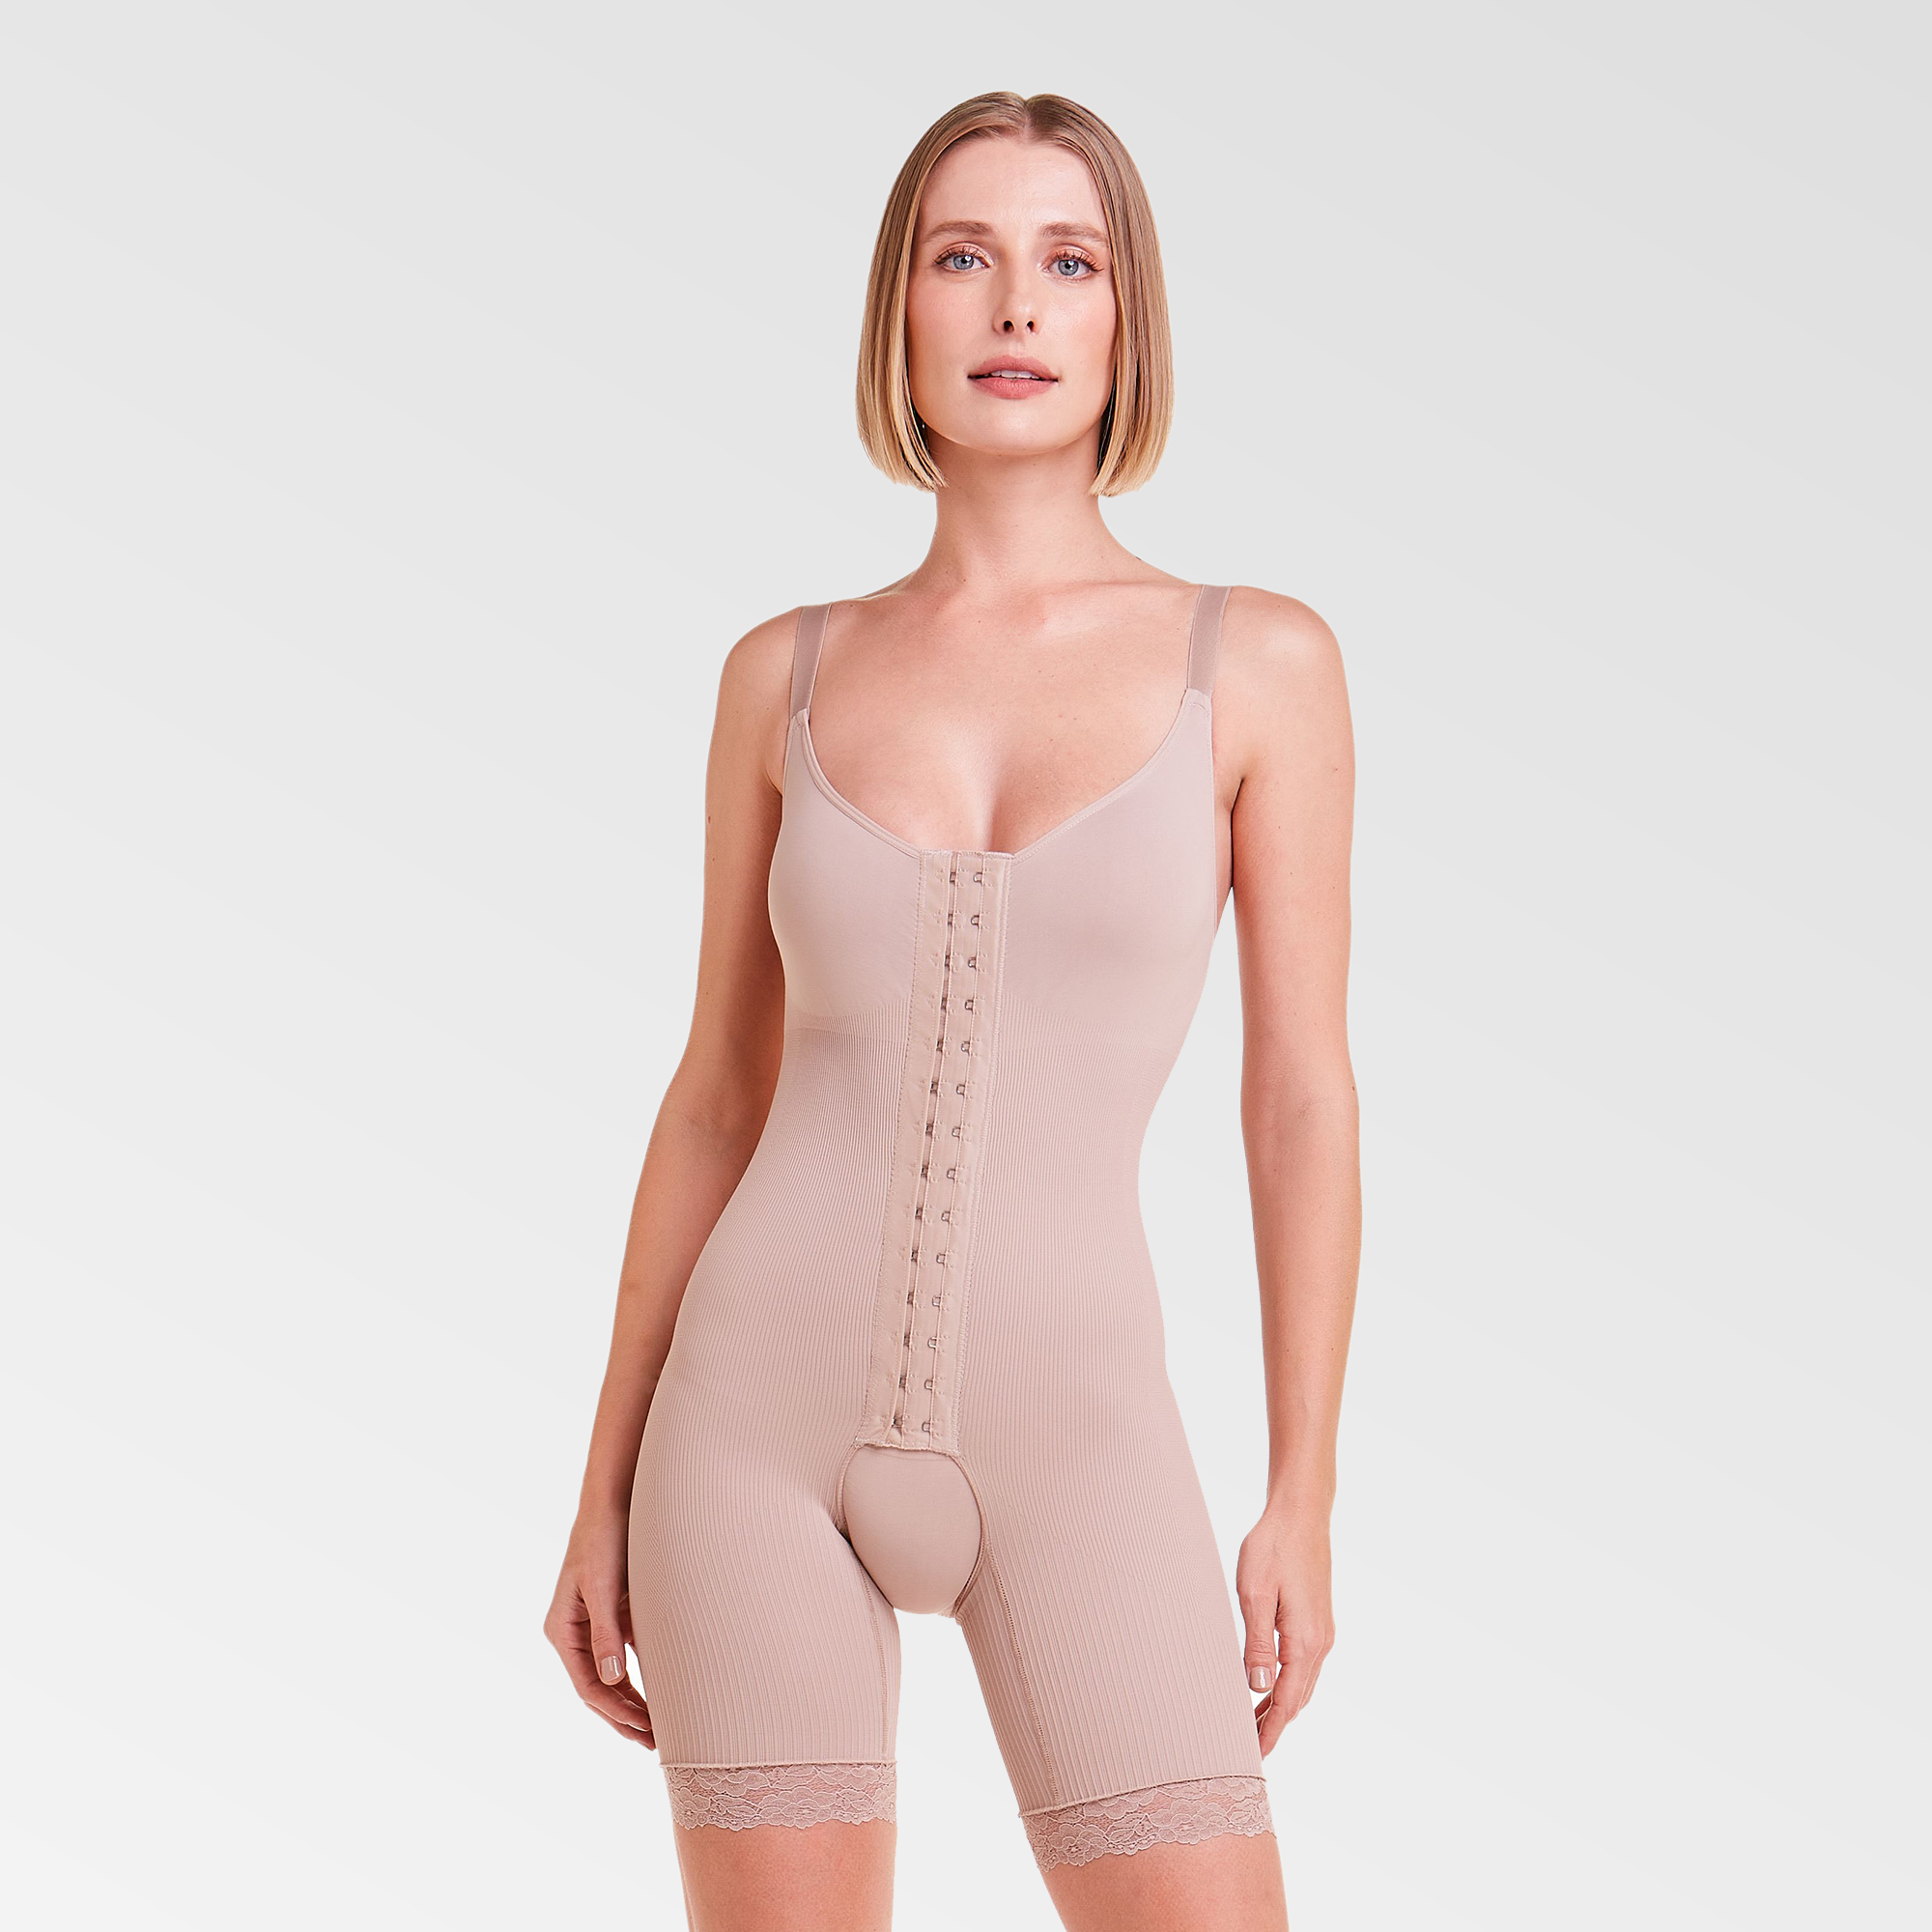 Female Surgery Corsets Under Breast – İnvo